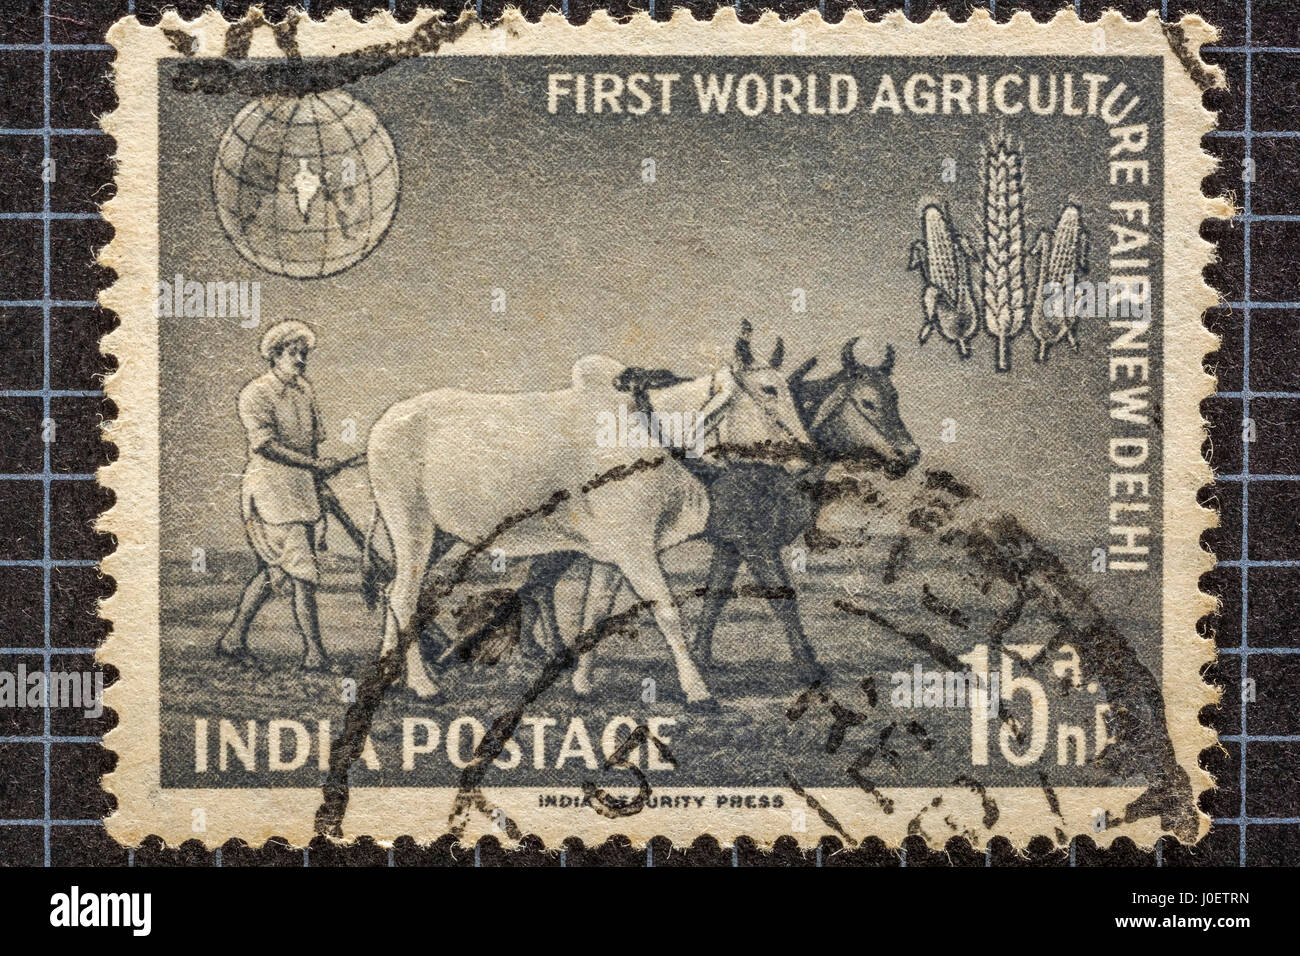 First world agricultural fair, New Delhi, postage stamps, India, Asia Stock Photo